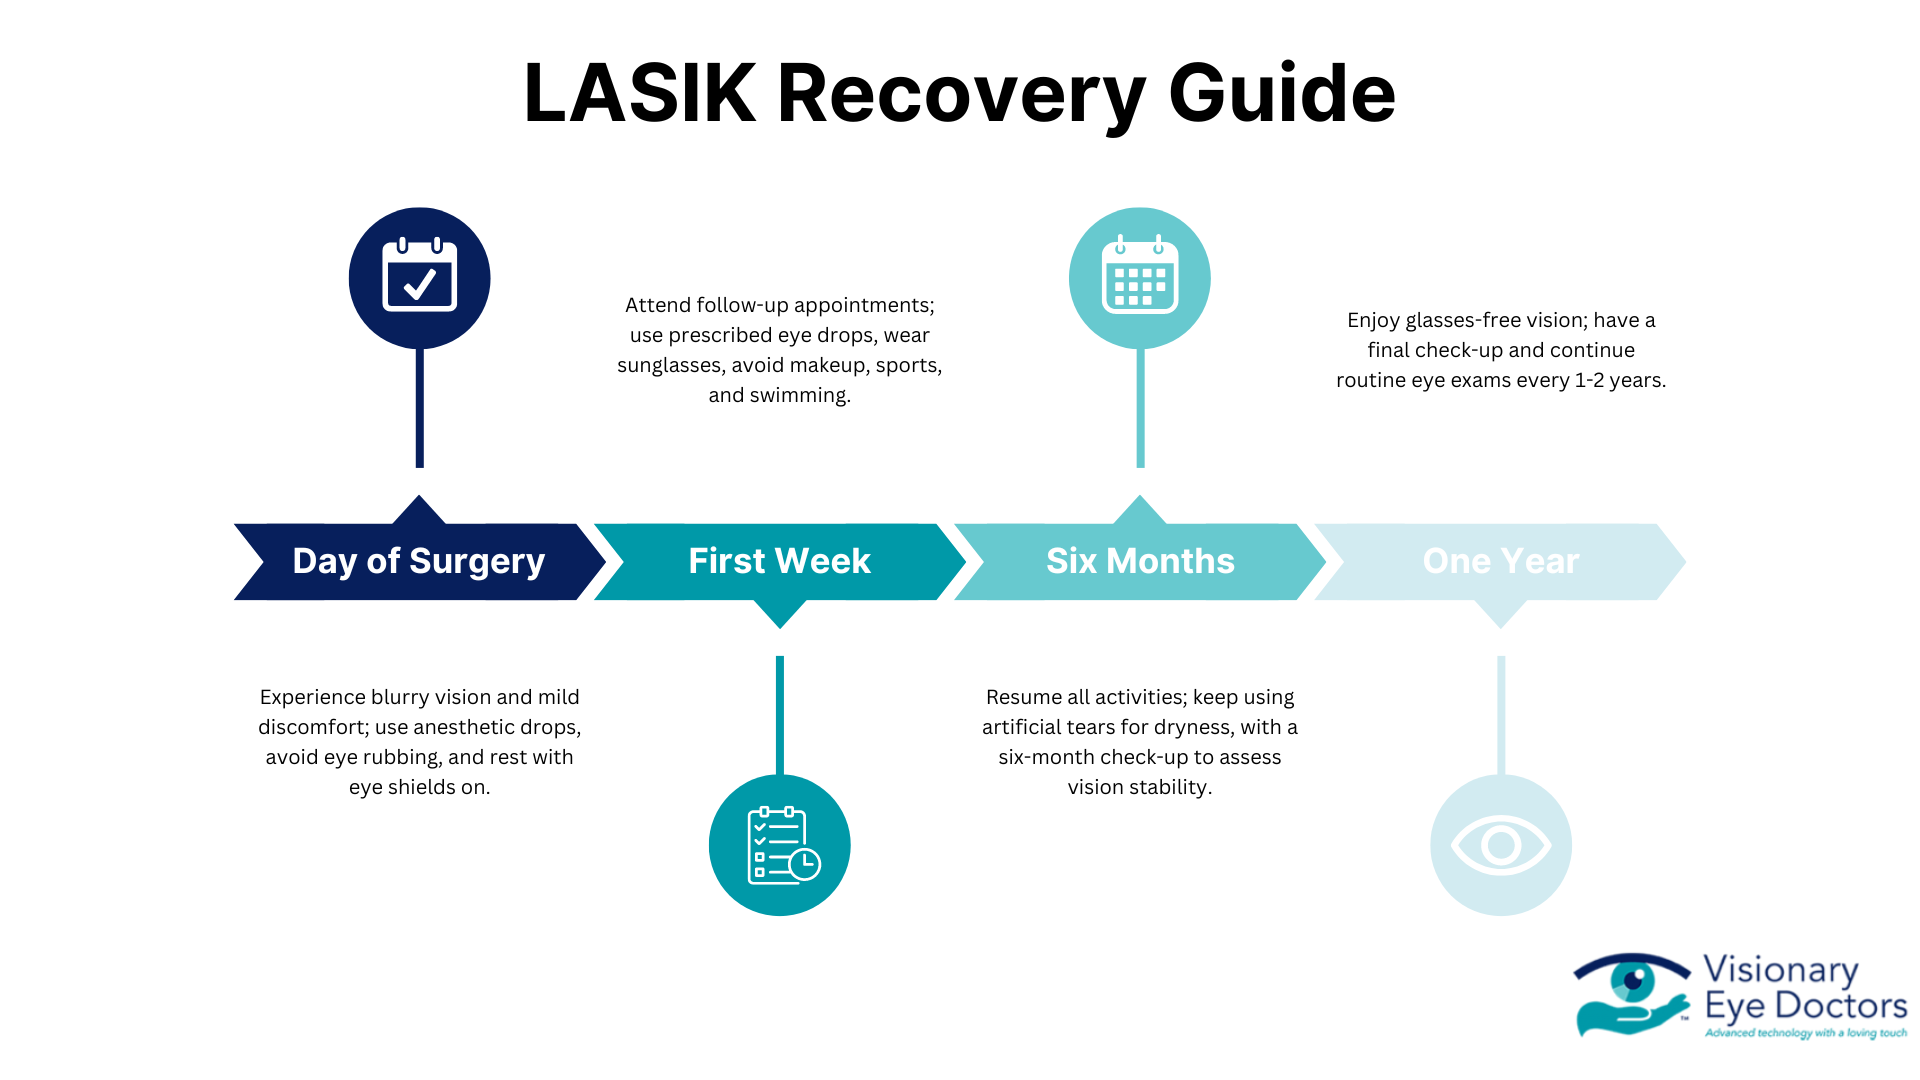 timeline of LASIK recovery process